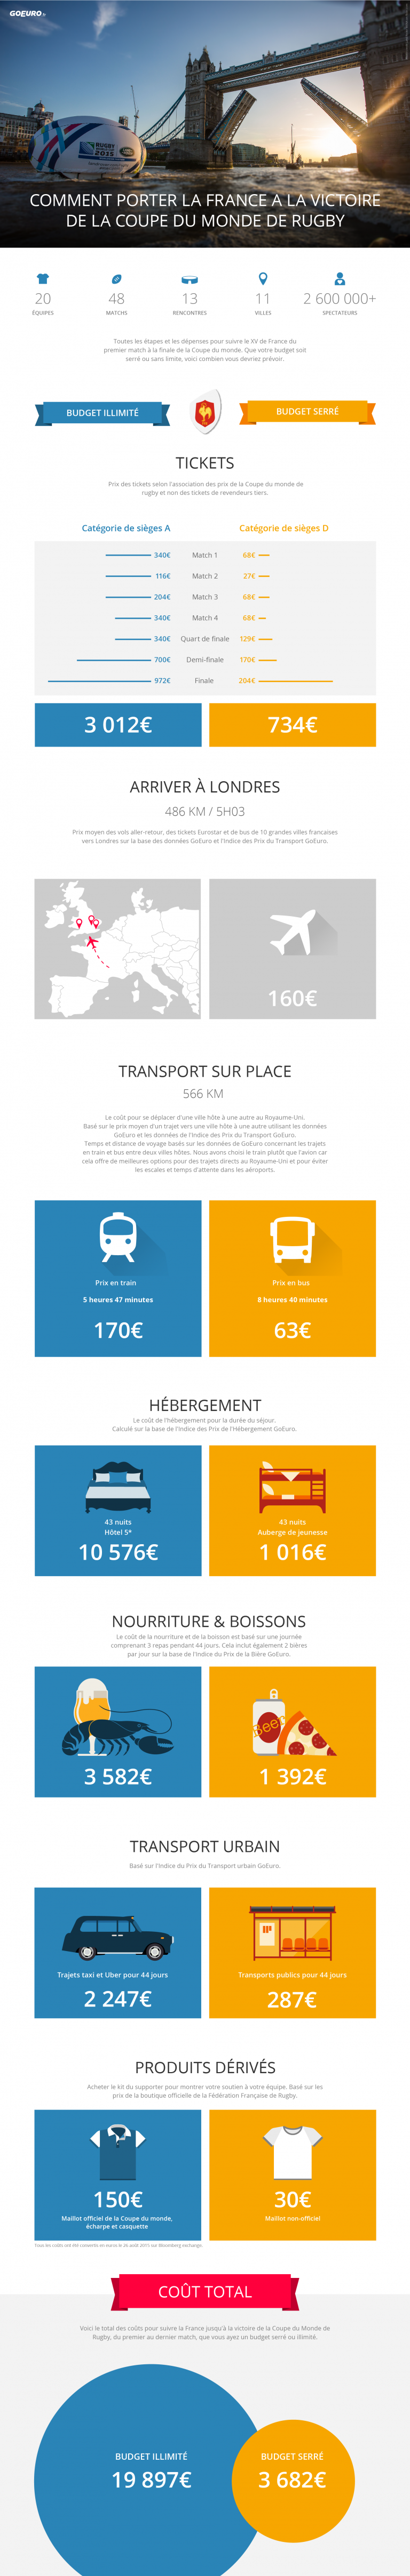 infographie goeuro.fr